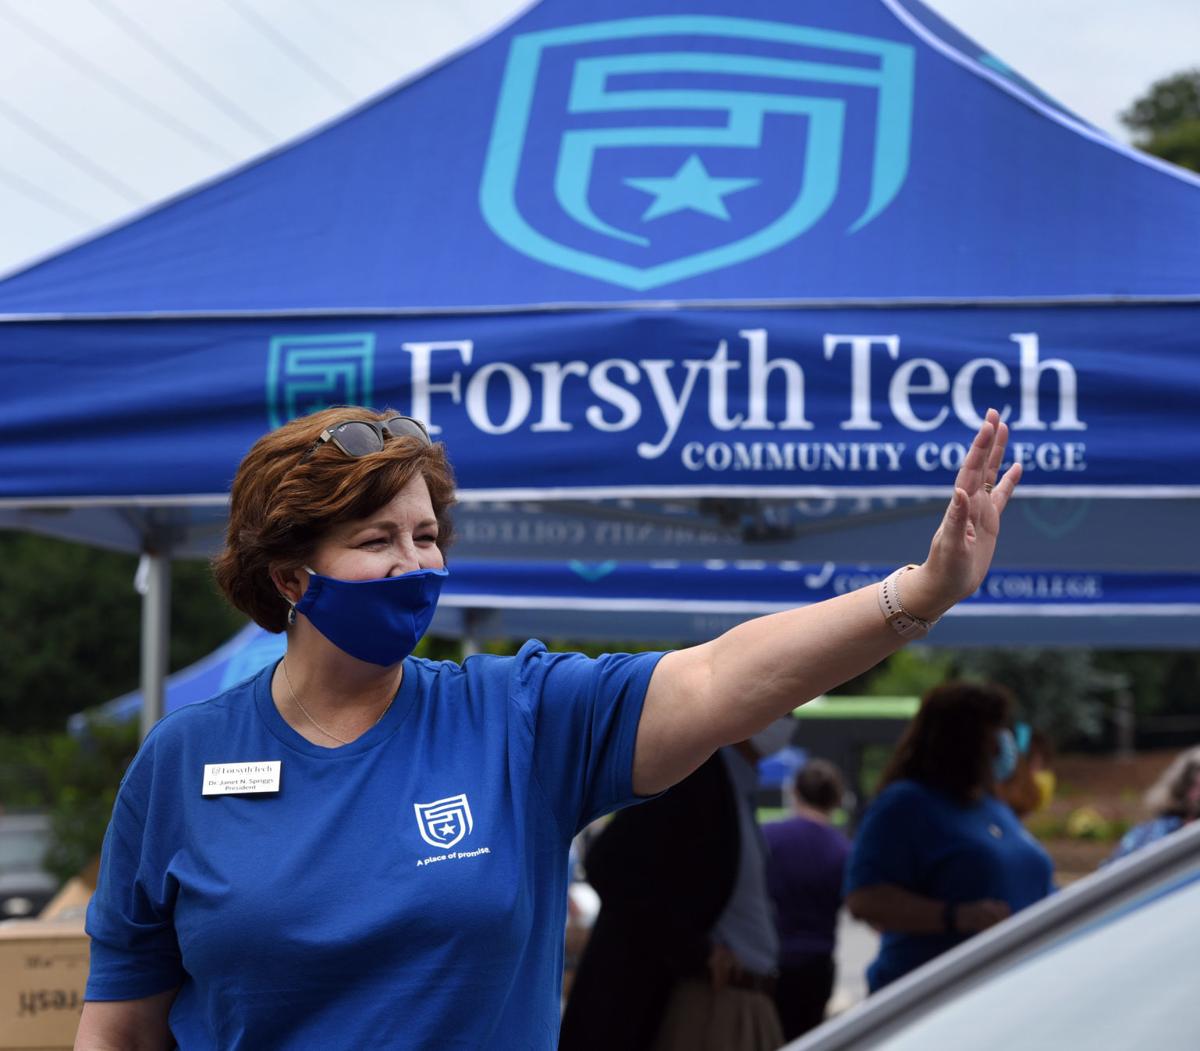 Forsyth Tech rolls out its new look Education